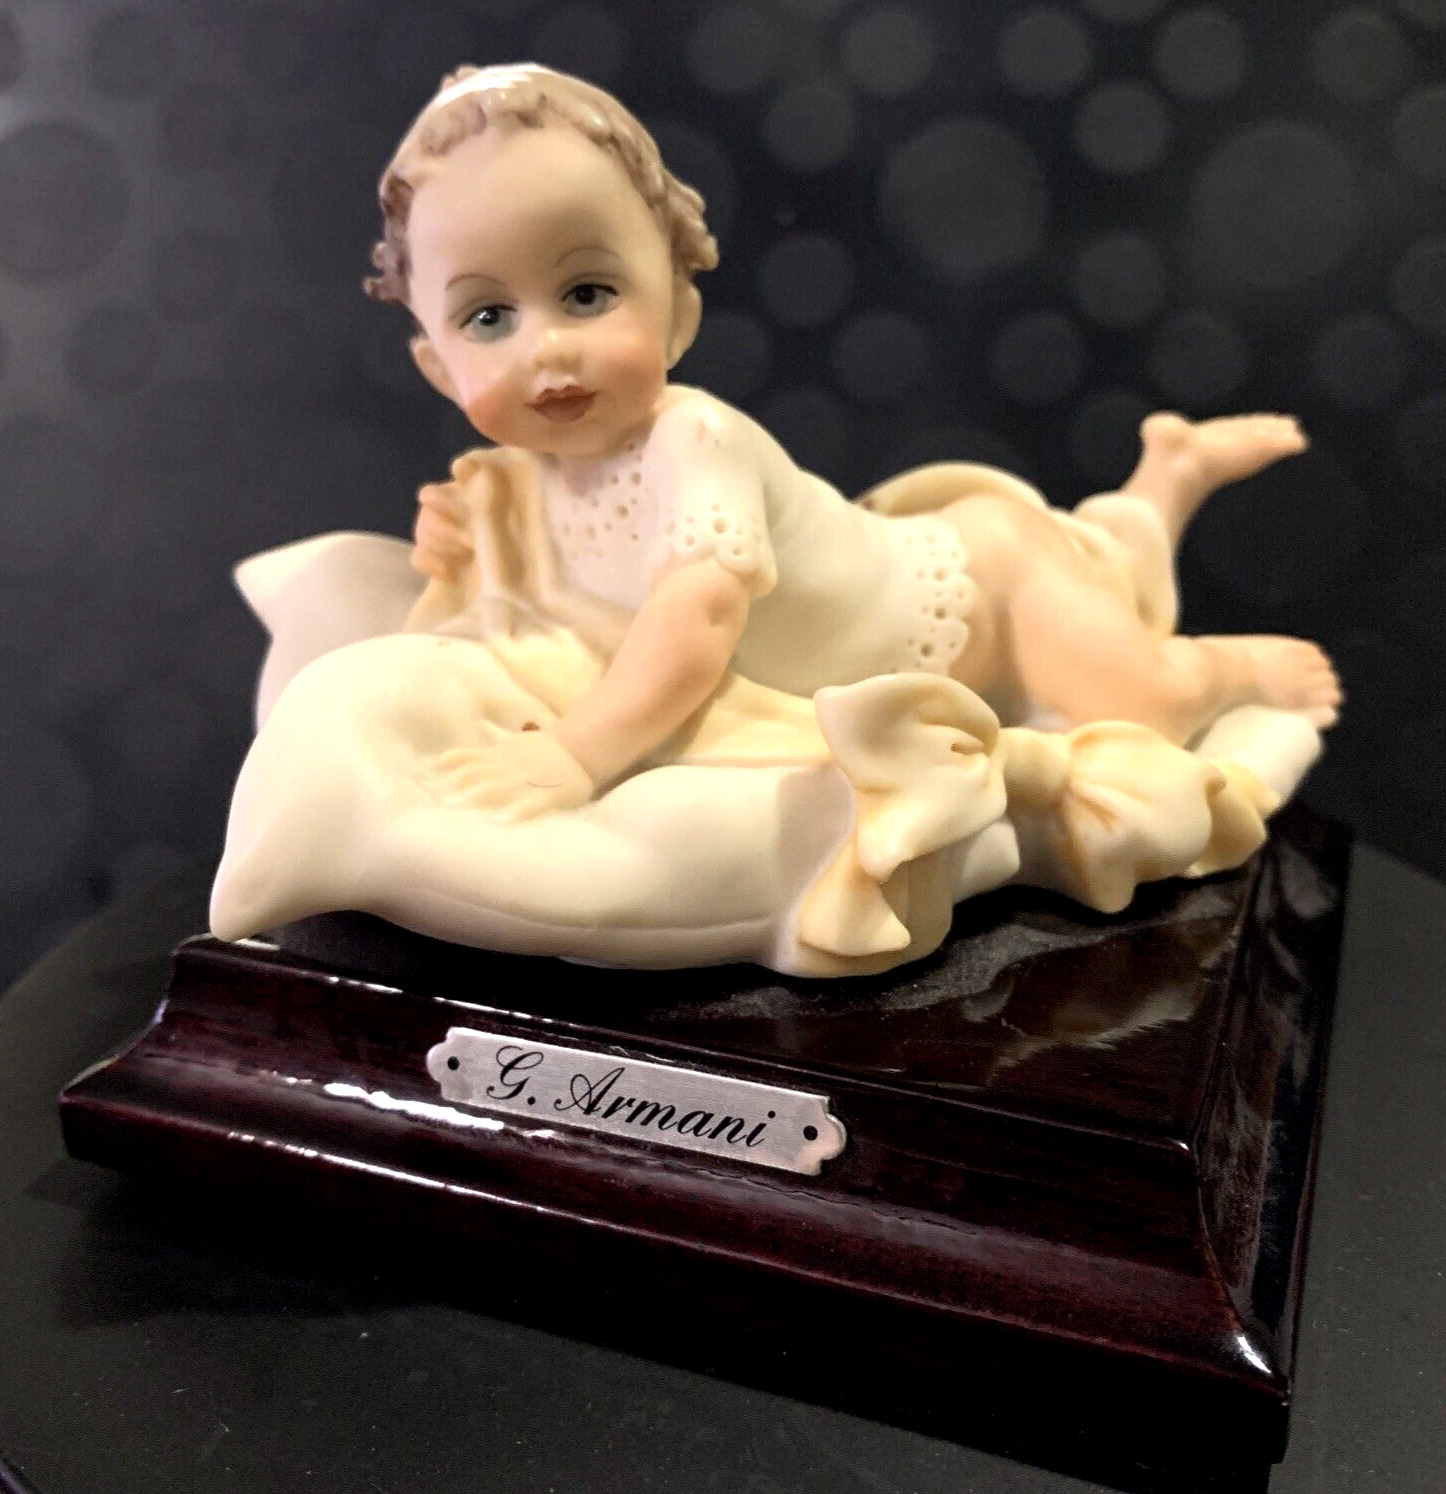 G. Armani Florence Figurine Vintage Infant on Pillows Decorative Collectible